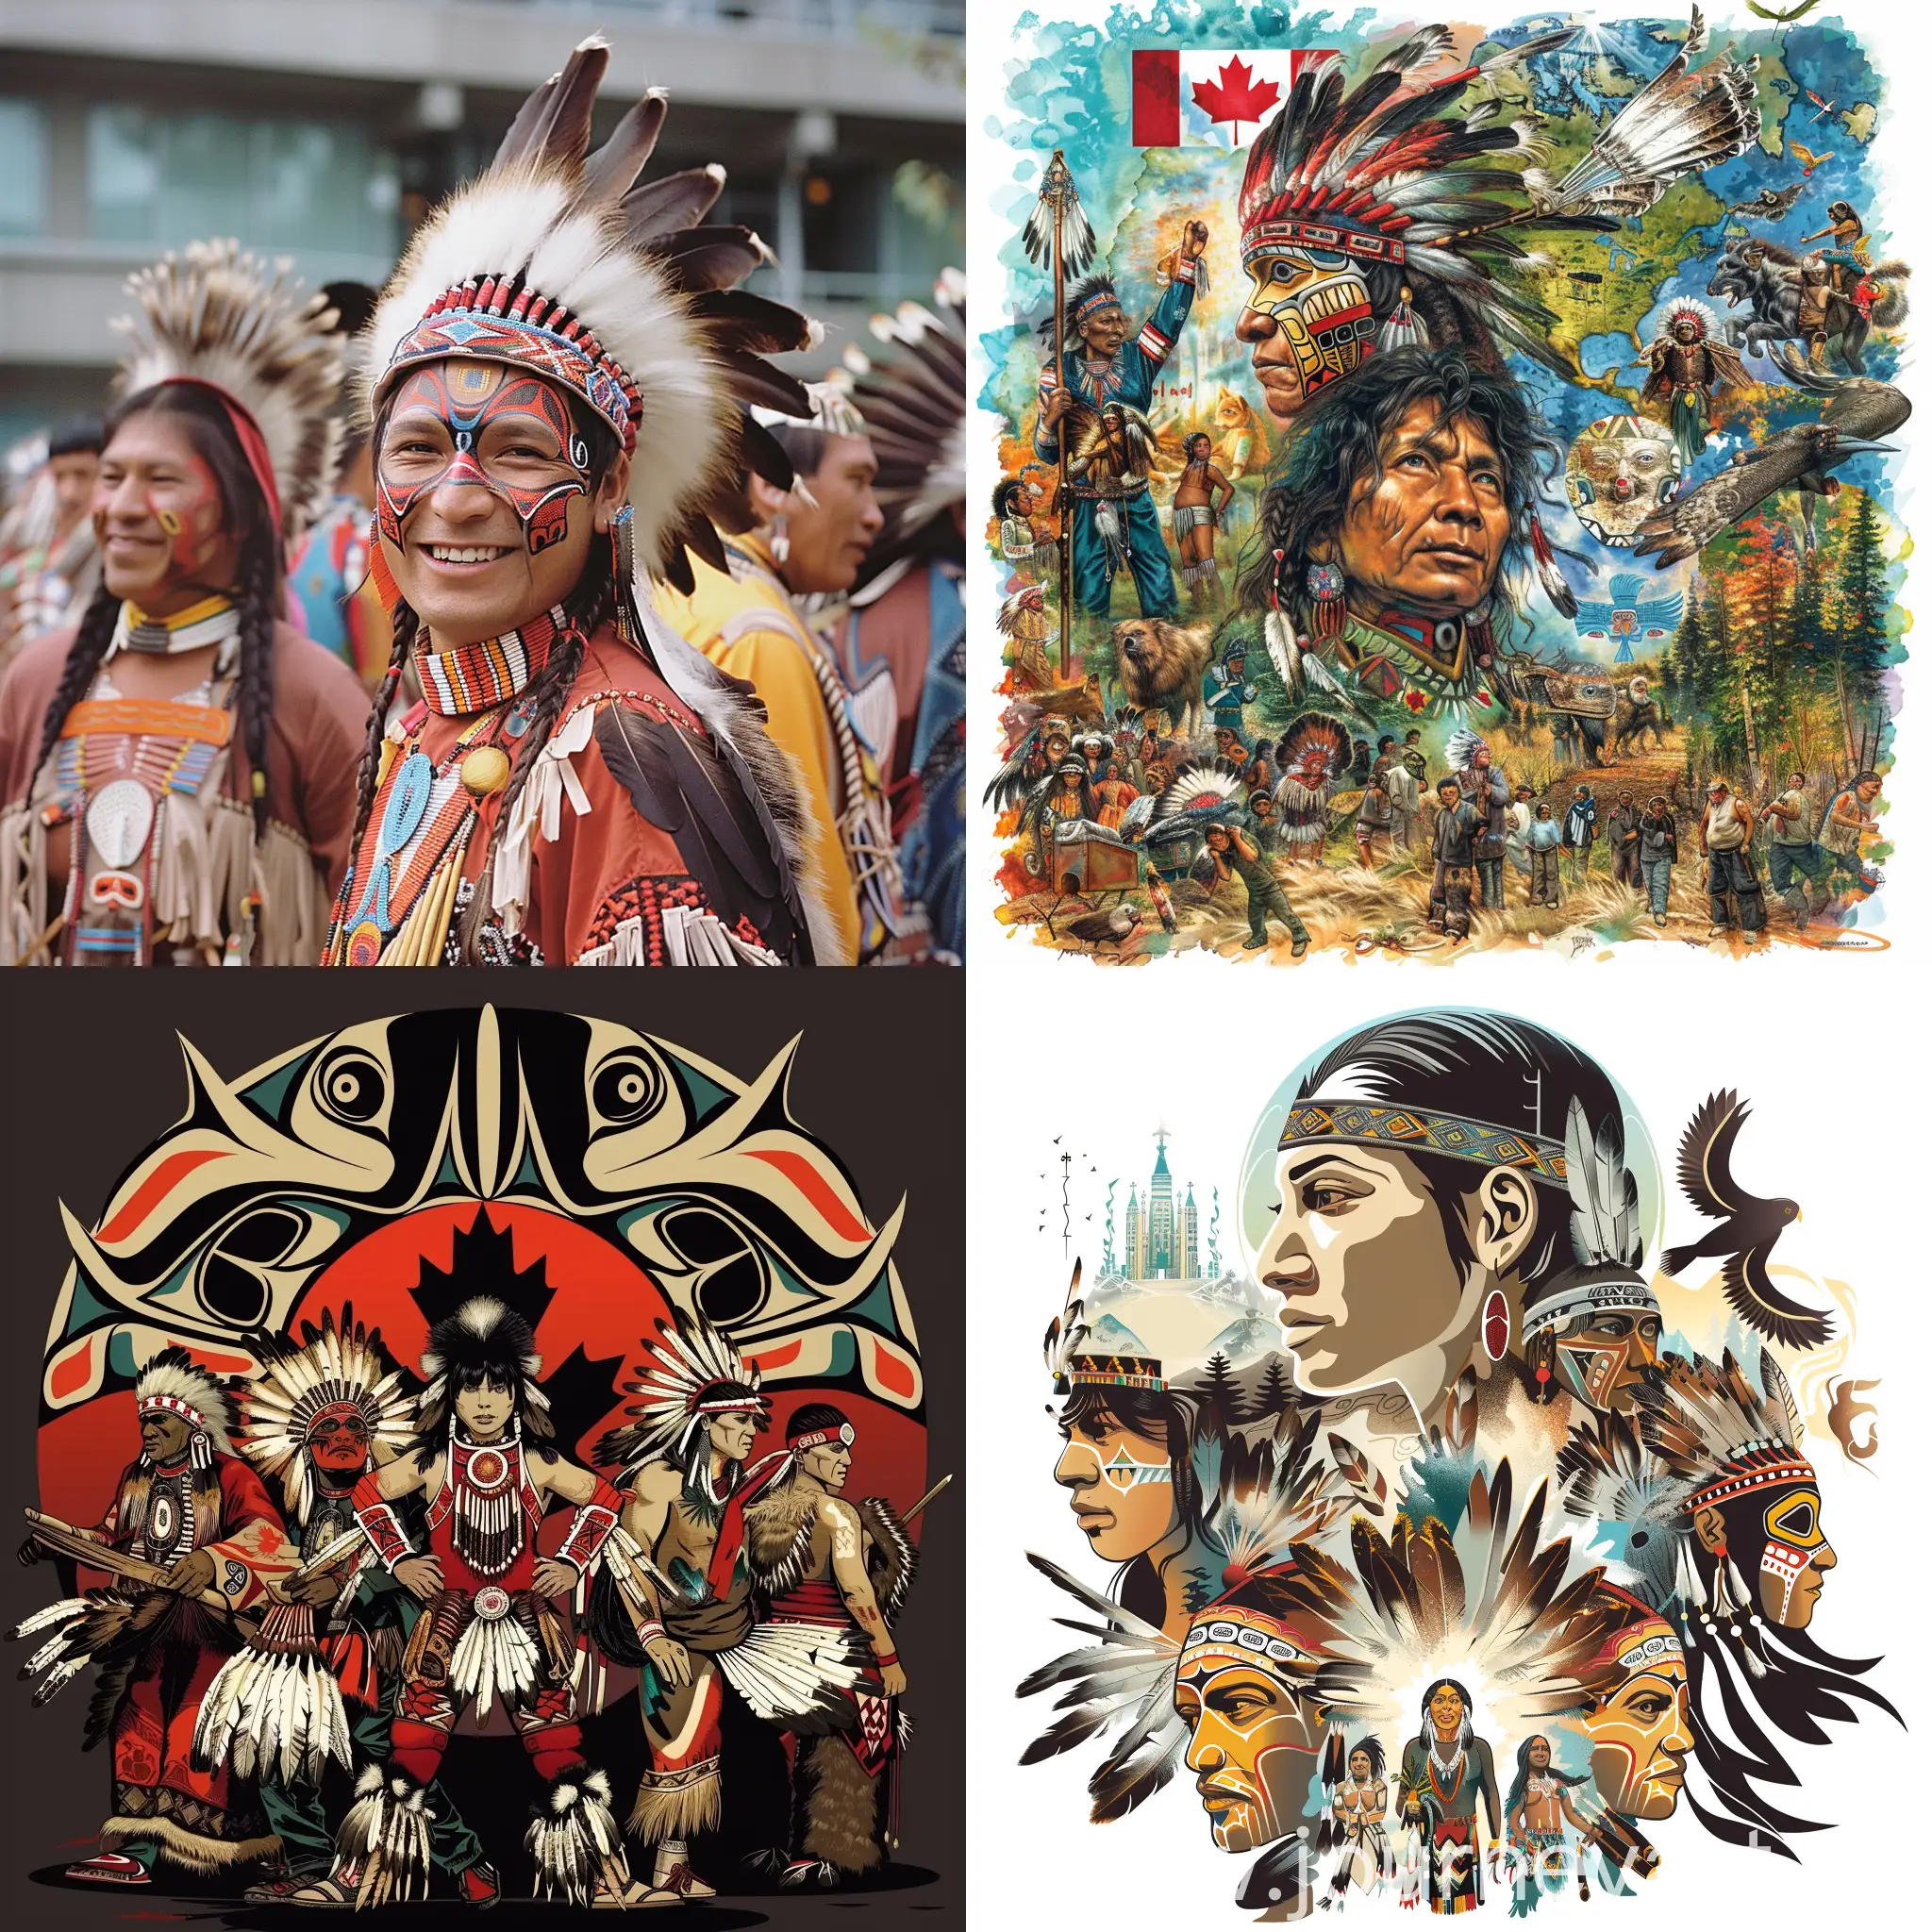 a picture that suggest the strength of indigenous cultures and how they contribute to Canada society